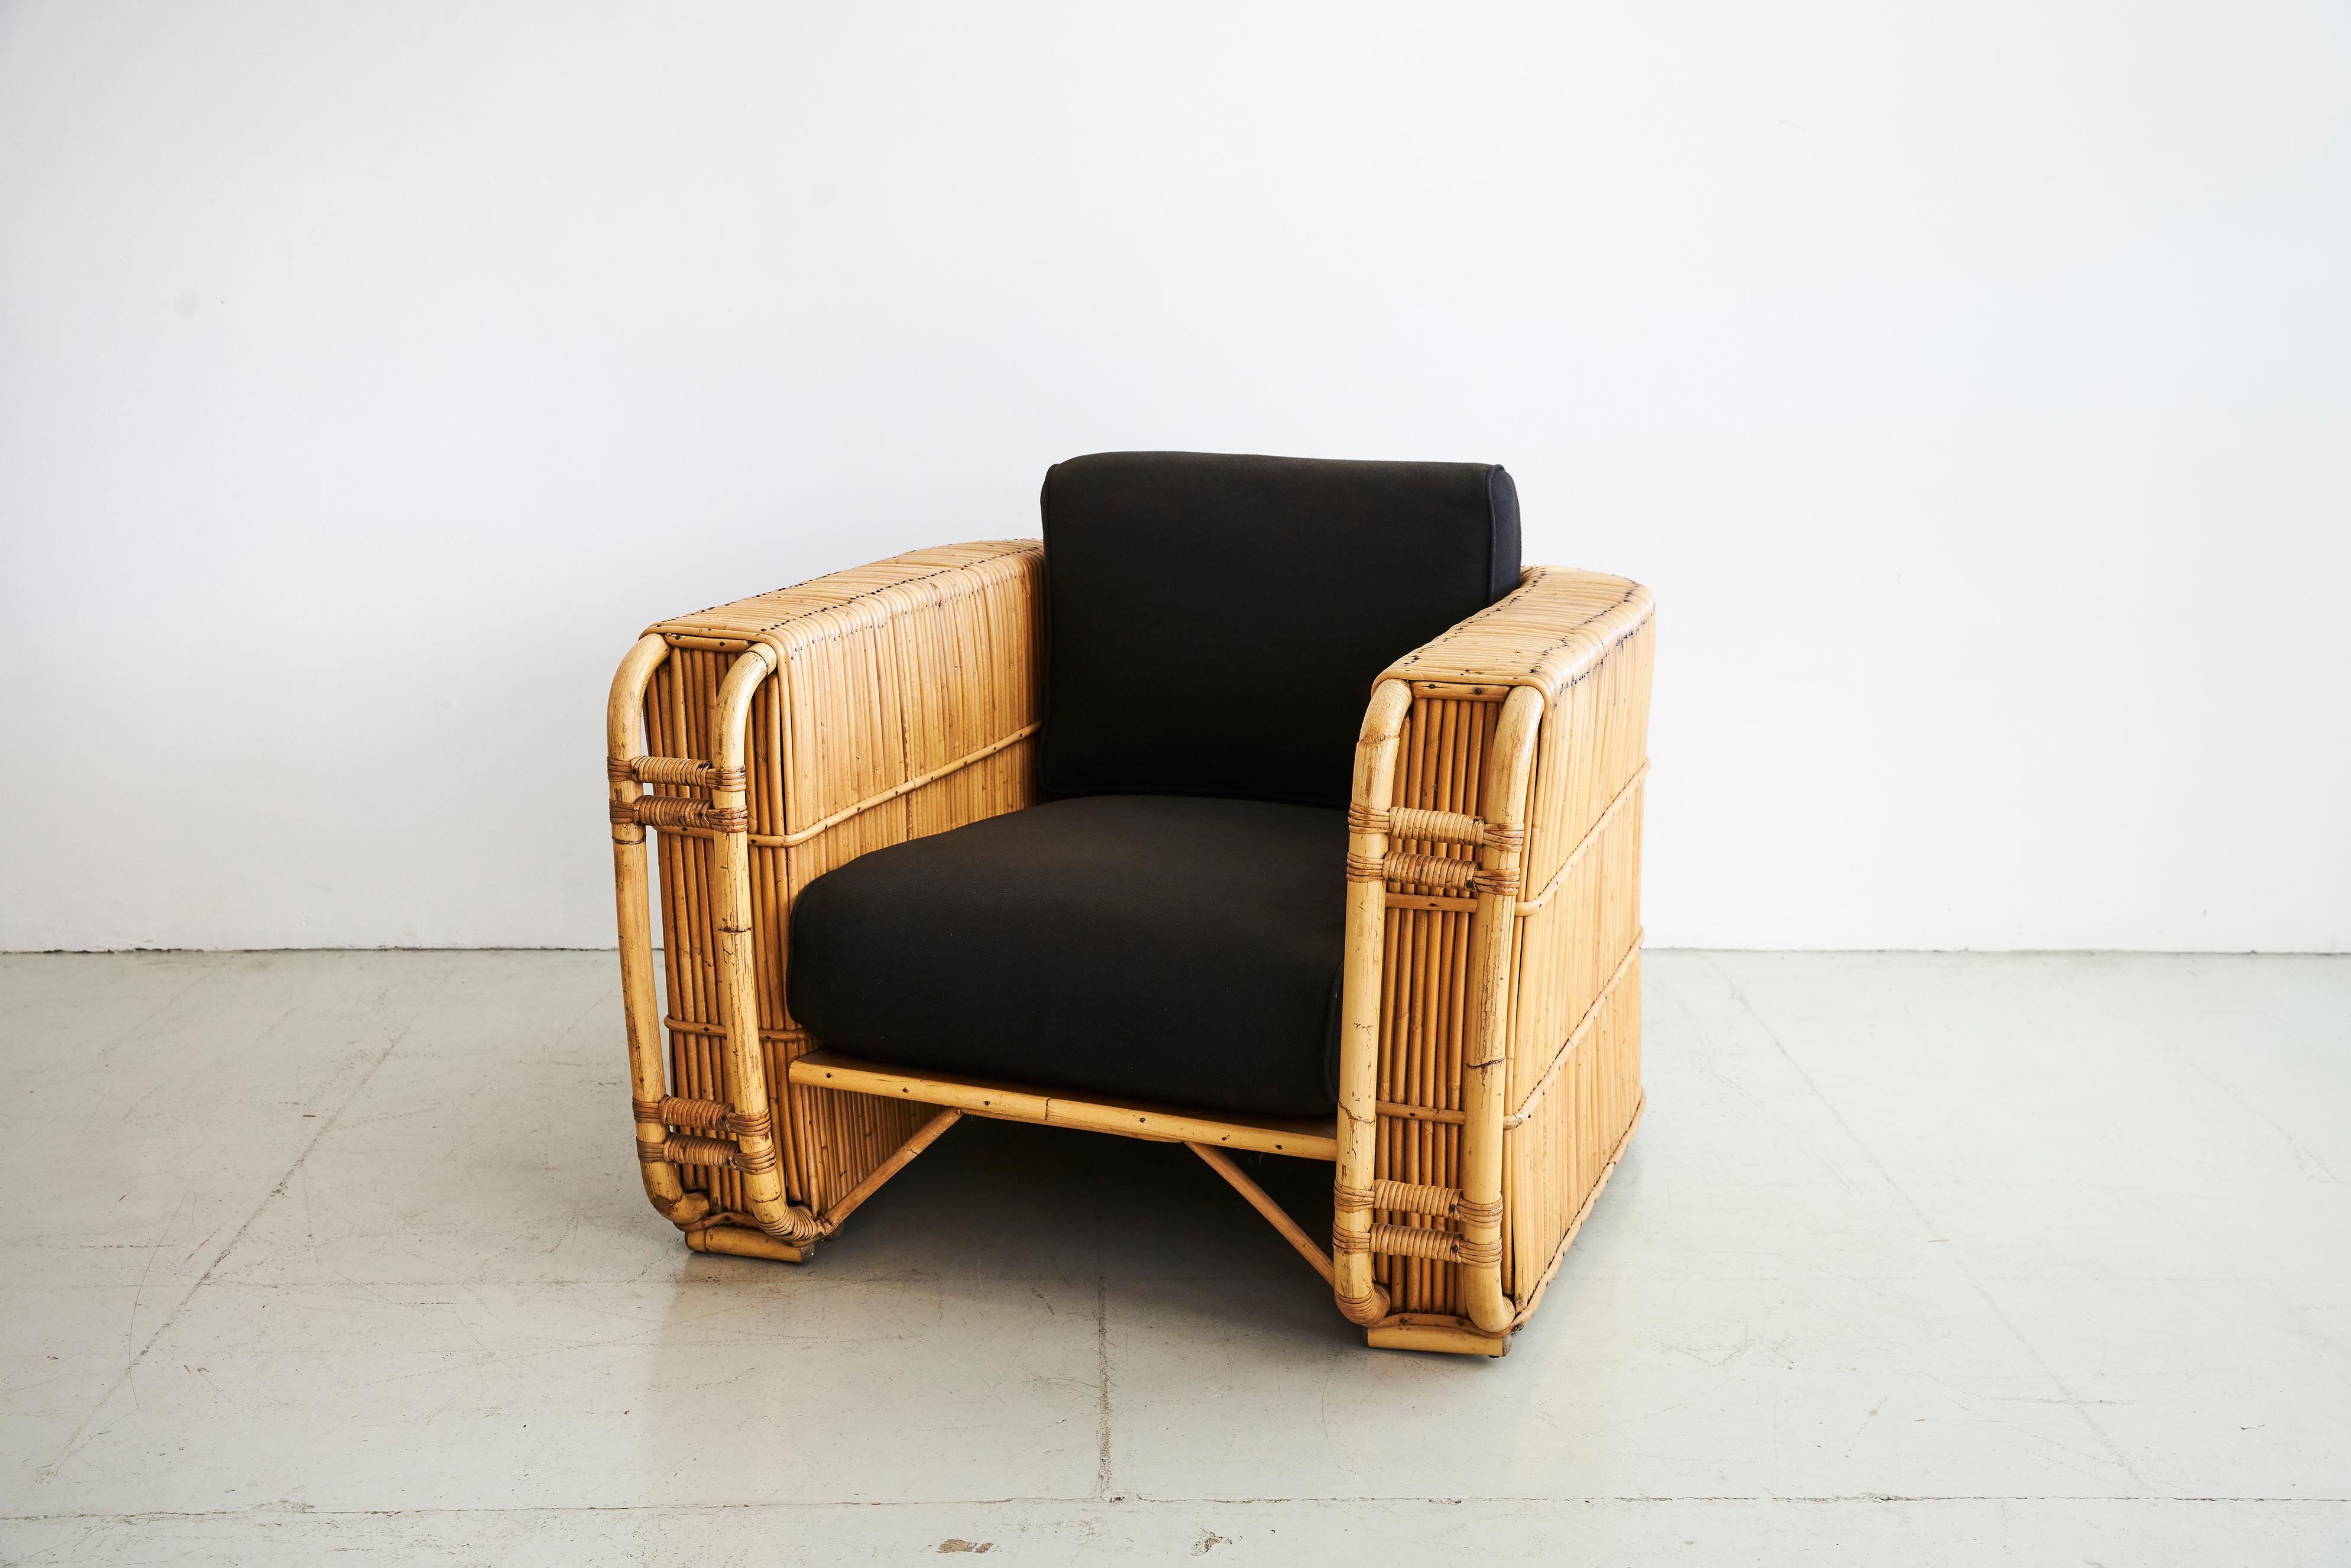 Incredible large scale French club chairs in bentwood and reed rattan. 
Unique cube shape with black upholstery.